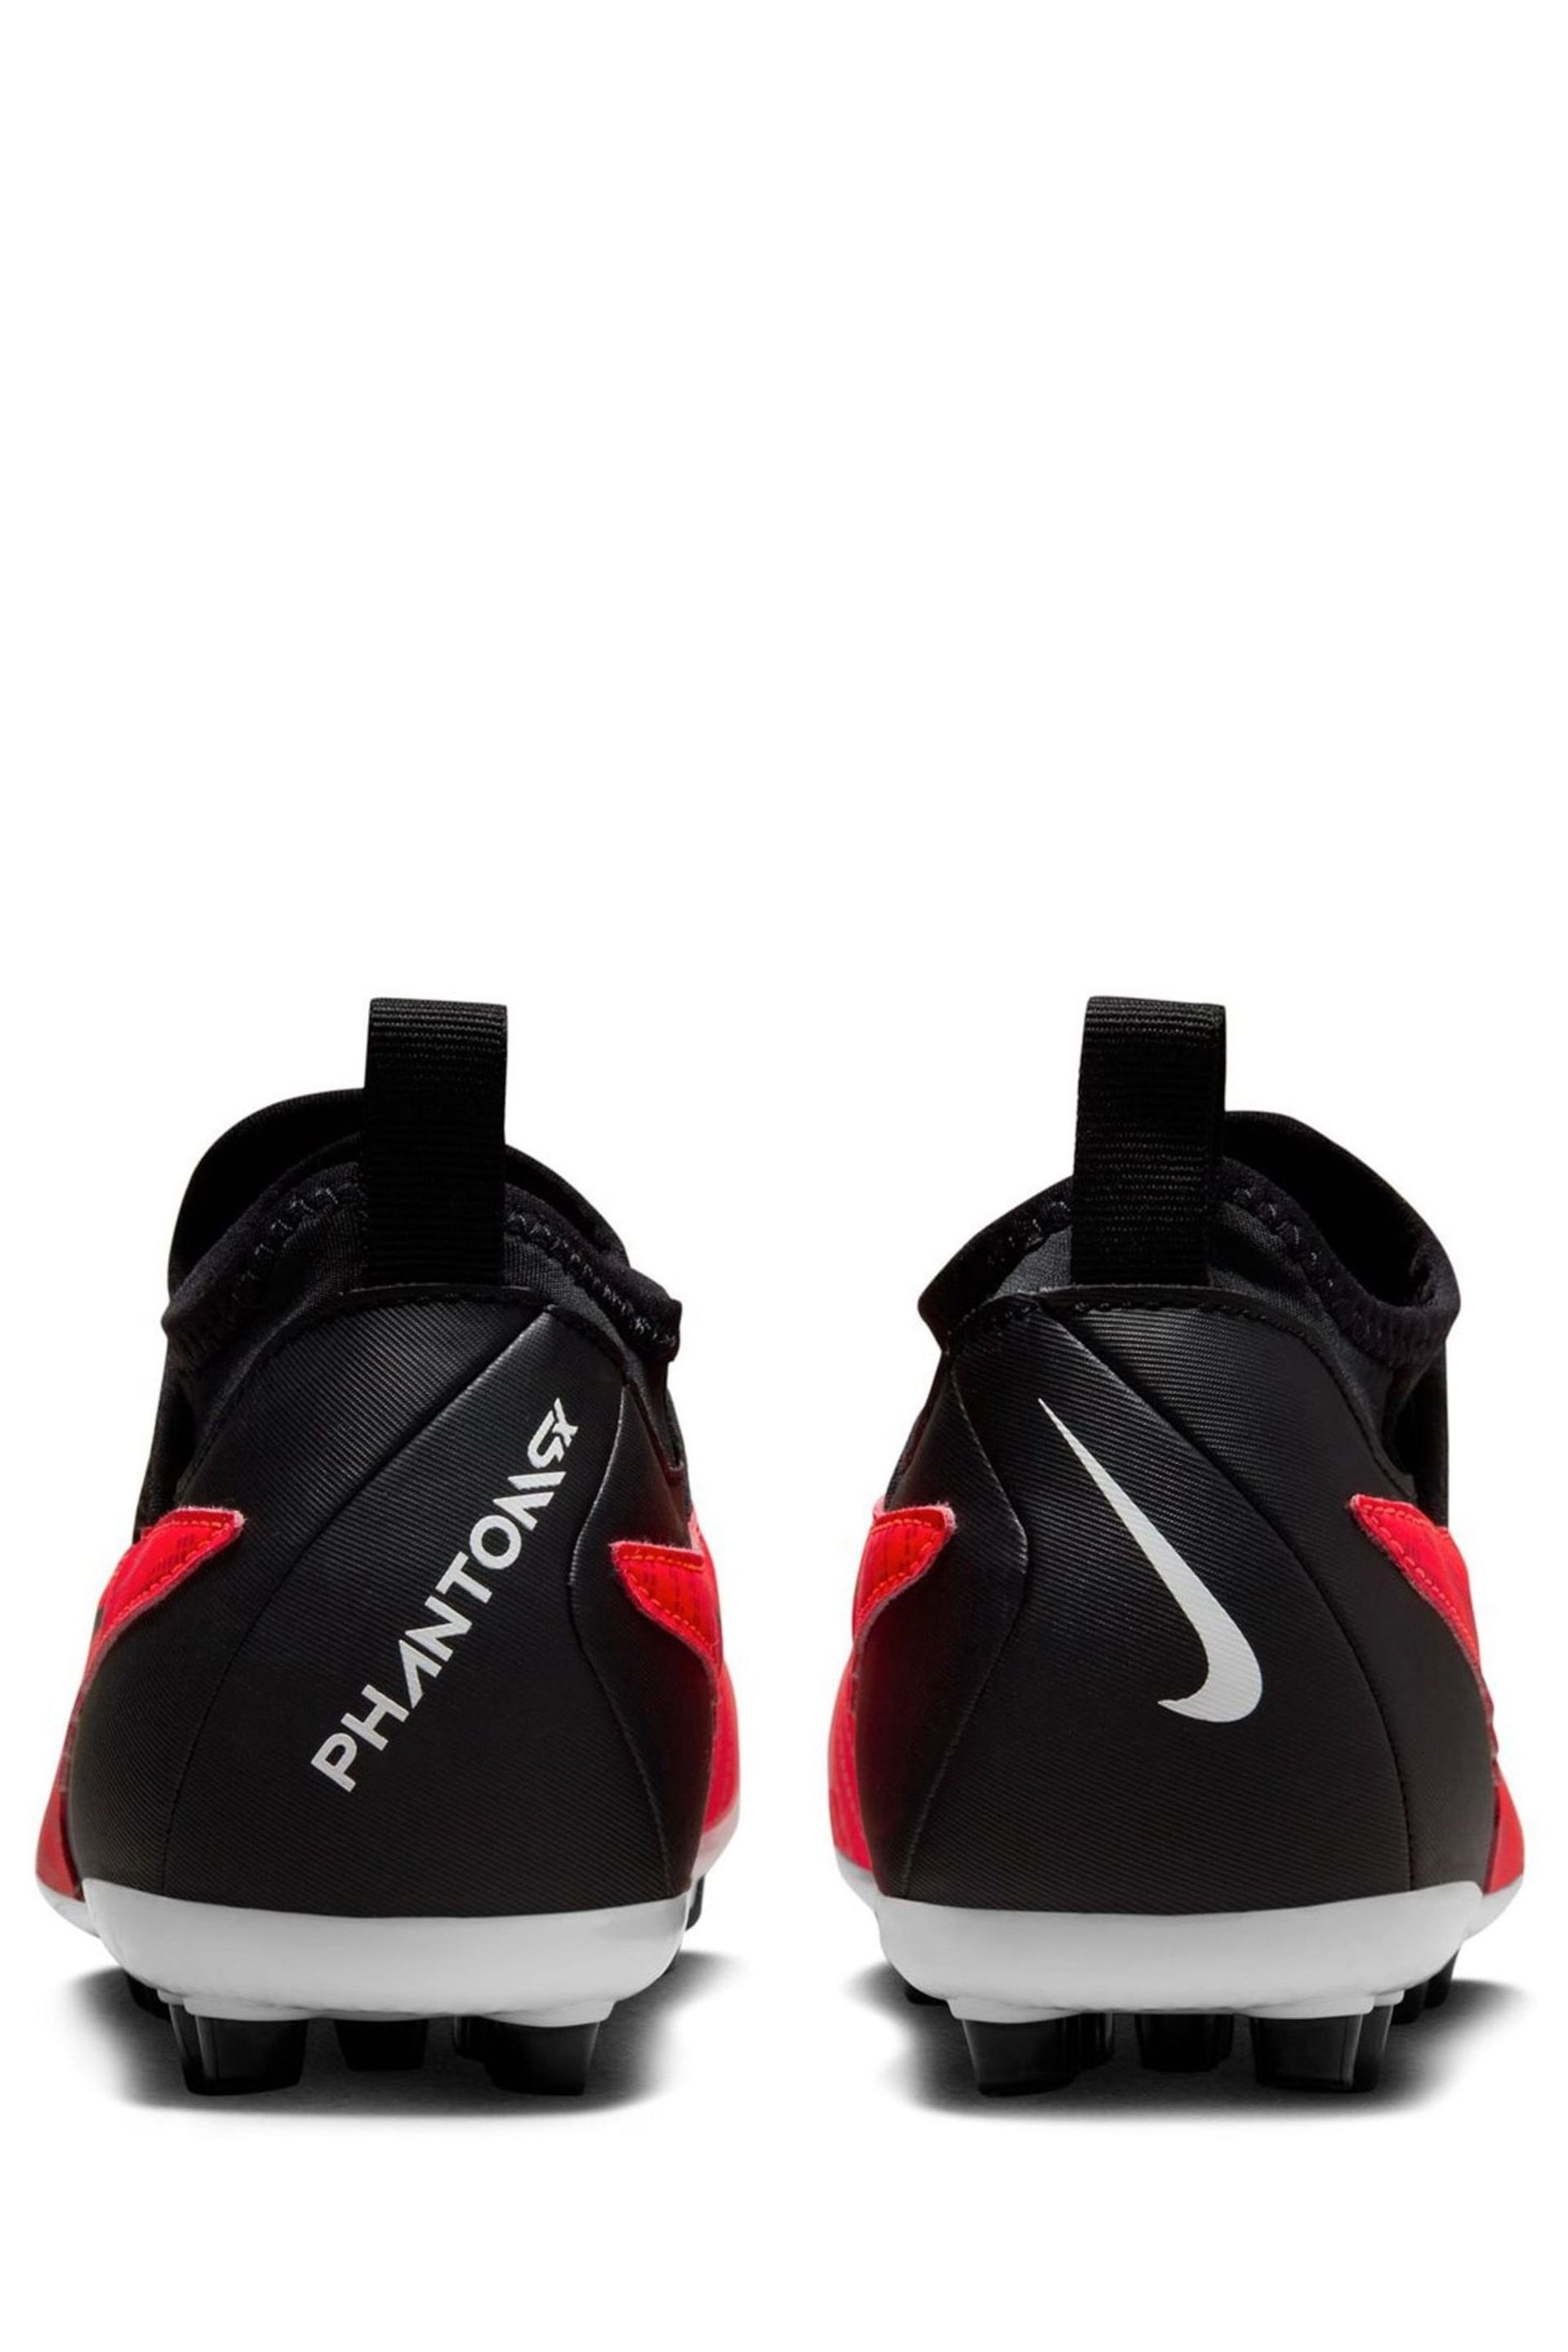 Nike Red Jr. Phantom Dynamic Artificial Ground Football Boots - Image 7 of 12